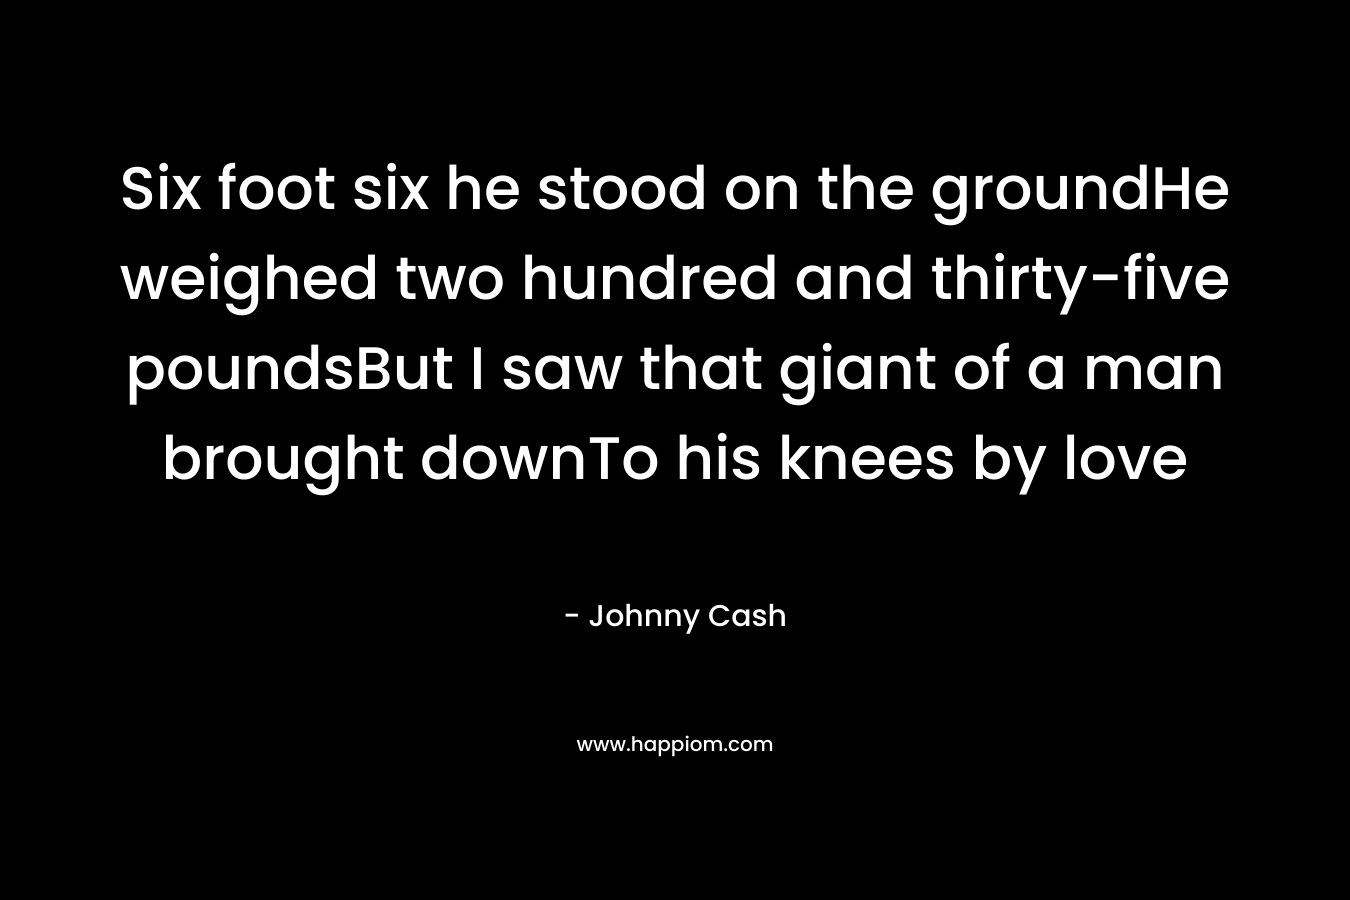 Six foot six he stood on the groundHe weighed two hundred and thirty-five poundsBut I saw that giant of a man brought downTo his knees by love – Johnny Cash